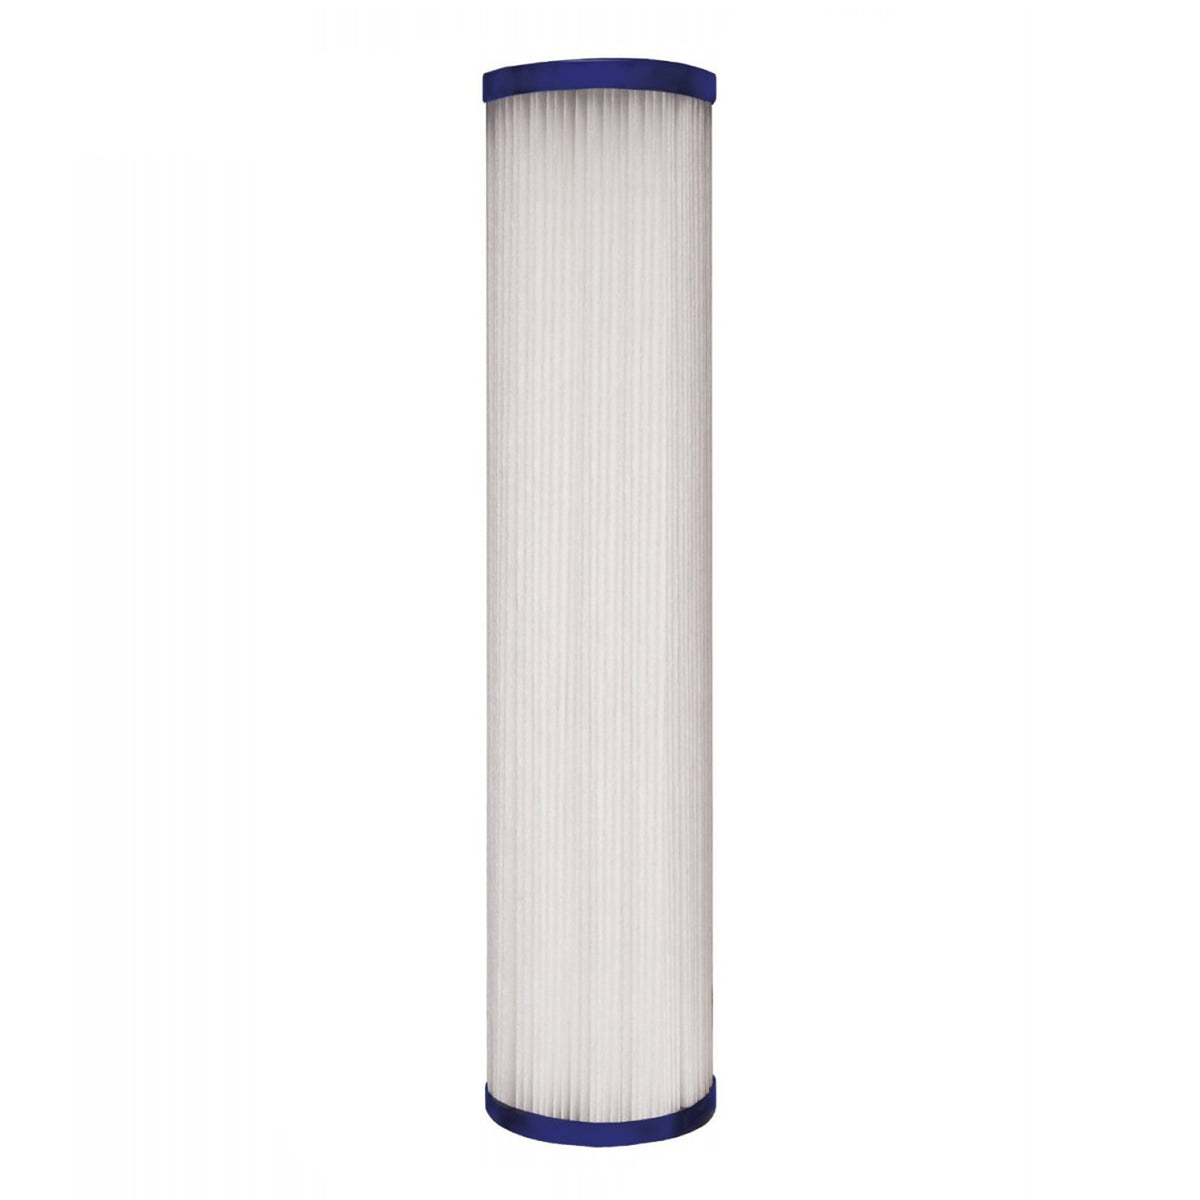 SPC-25-1005 Hydronix Comparable Pleated Sediment Water Filter by Tier1 (2-Pack)